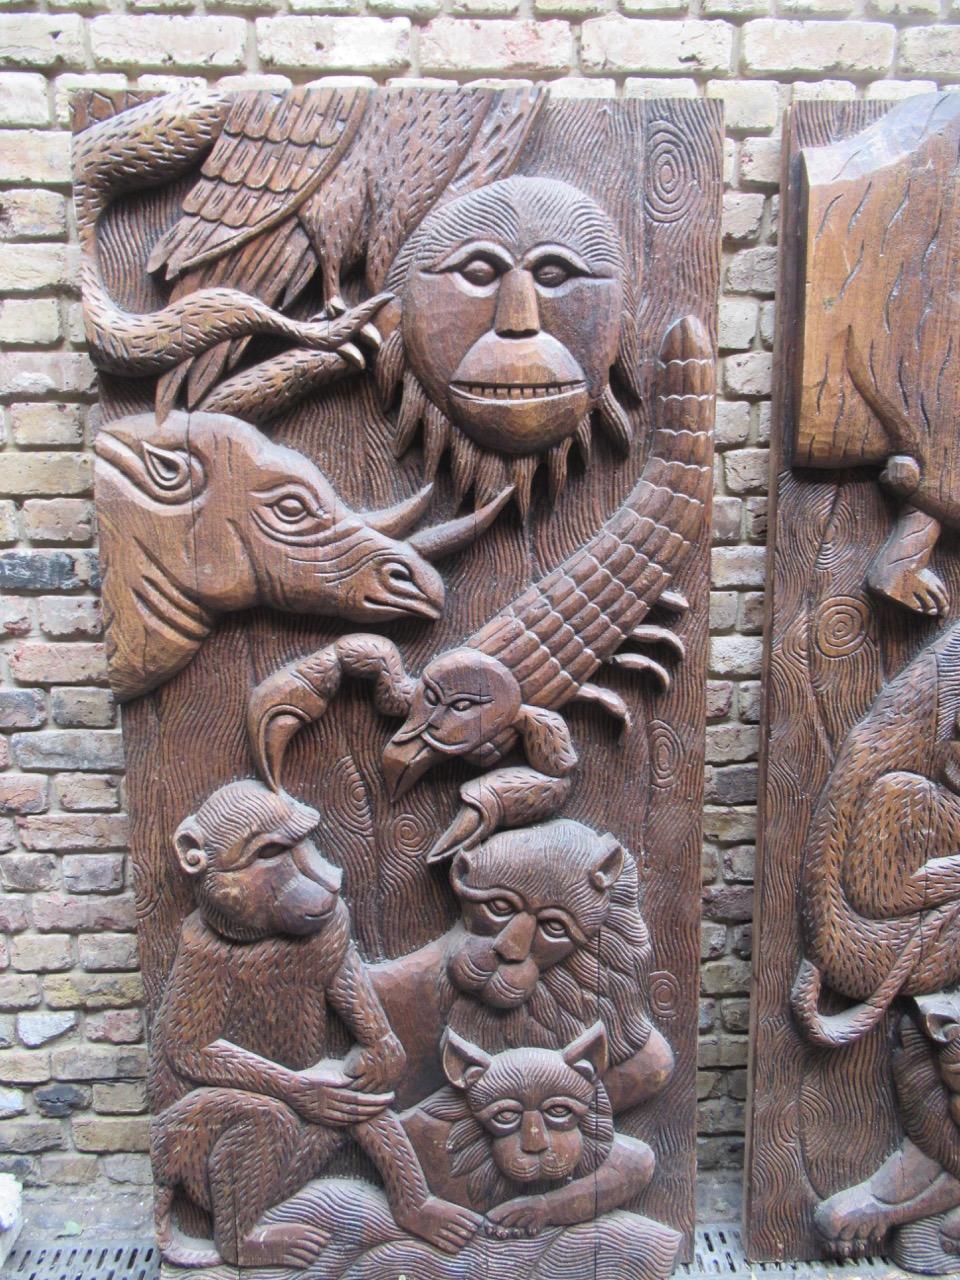 A pair of decorative teak wood panel sculptures carved in low relief, with monkeys, rhinos and other wild animals carved in relief. This beautiful pair of panels were created and stood in the historic Camden Stables market in London.